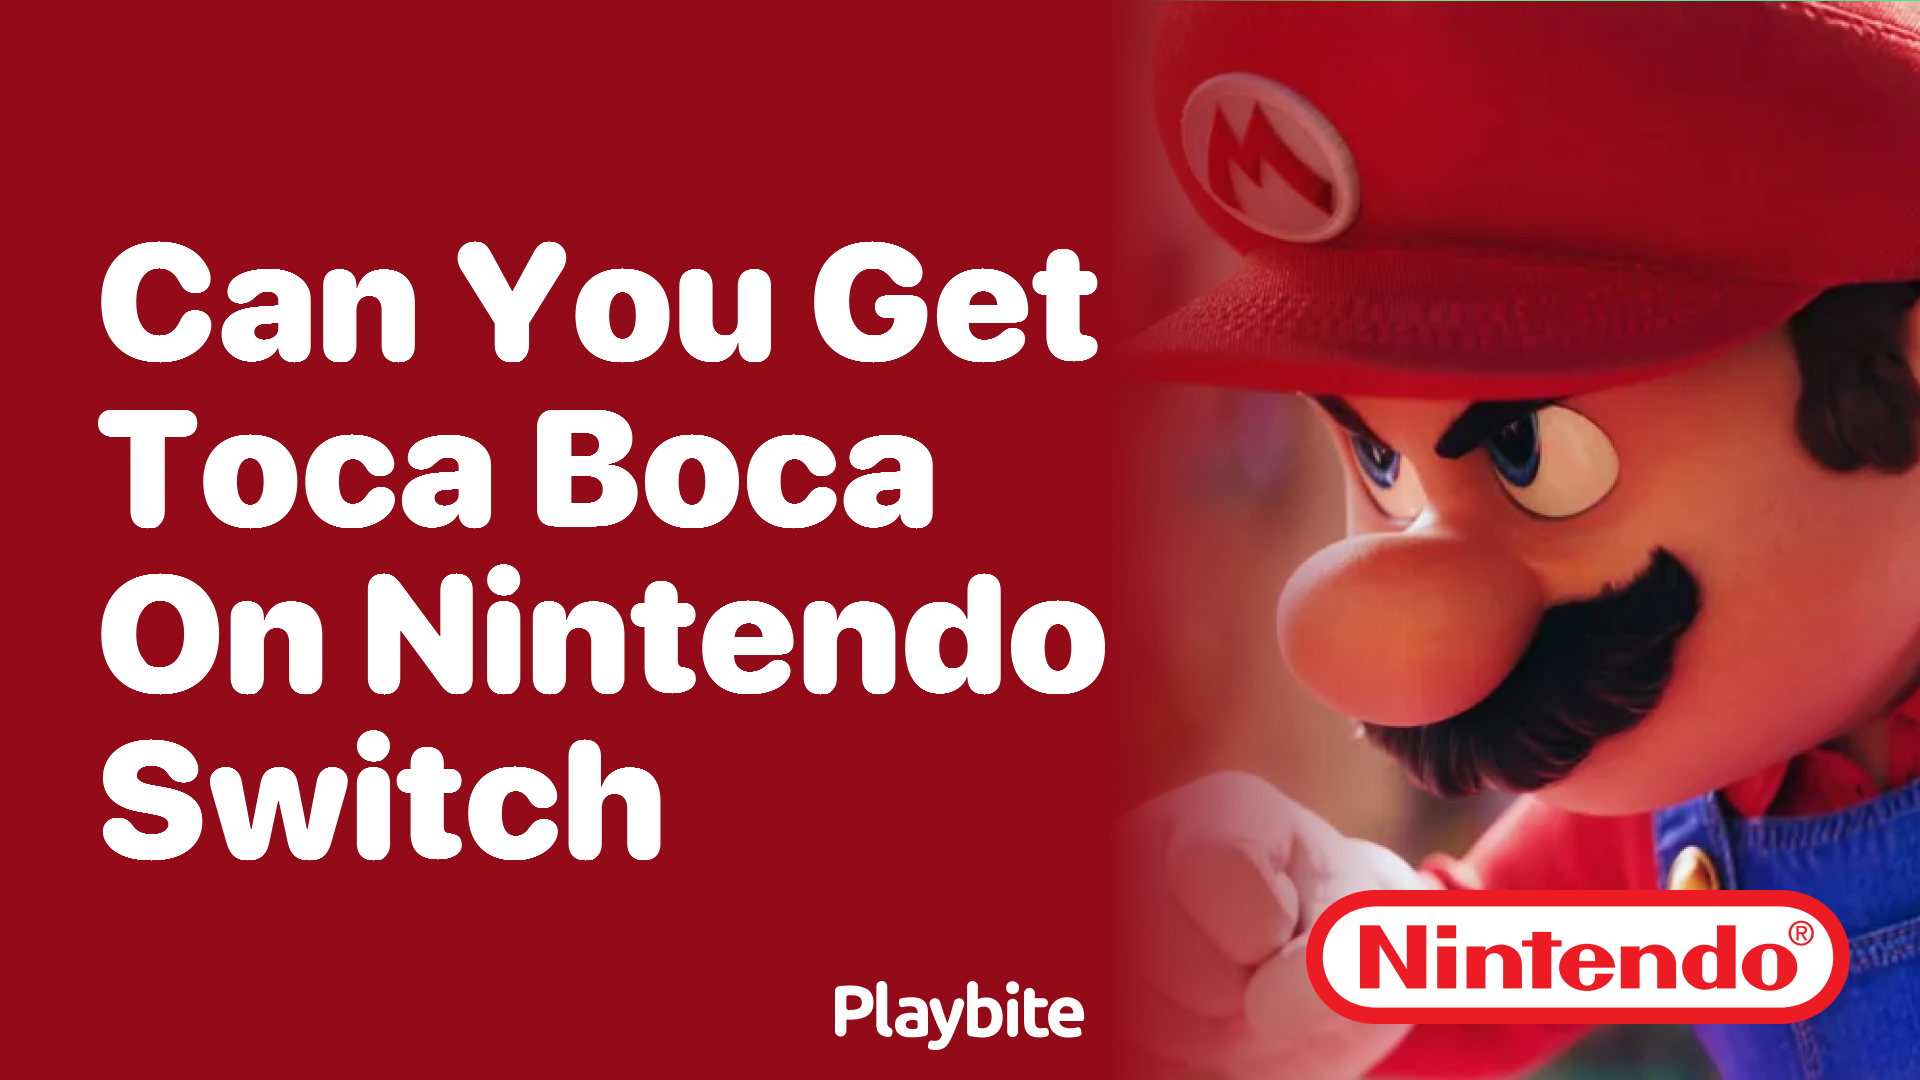 Can You Get Toca Boca on Nintendo Switch? - Playbite